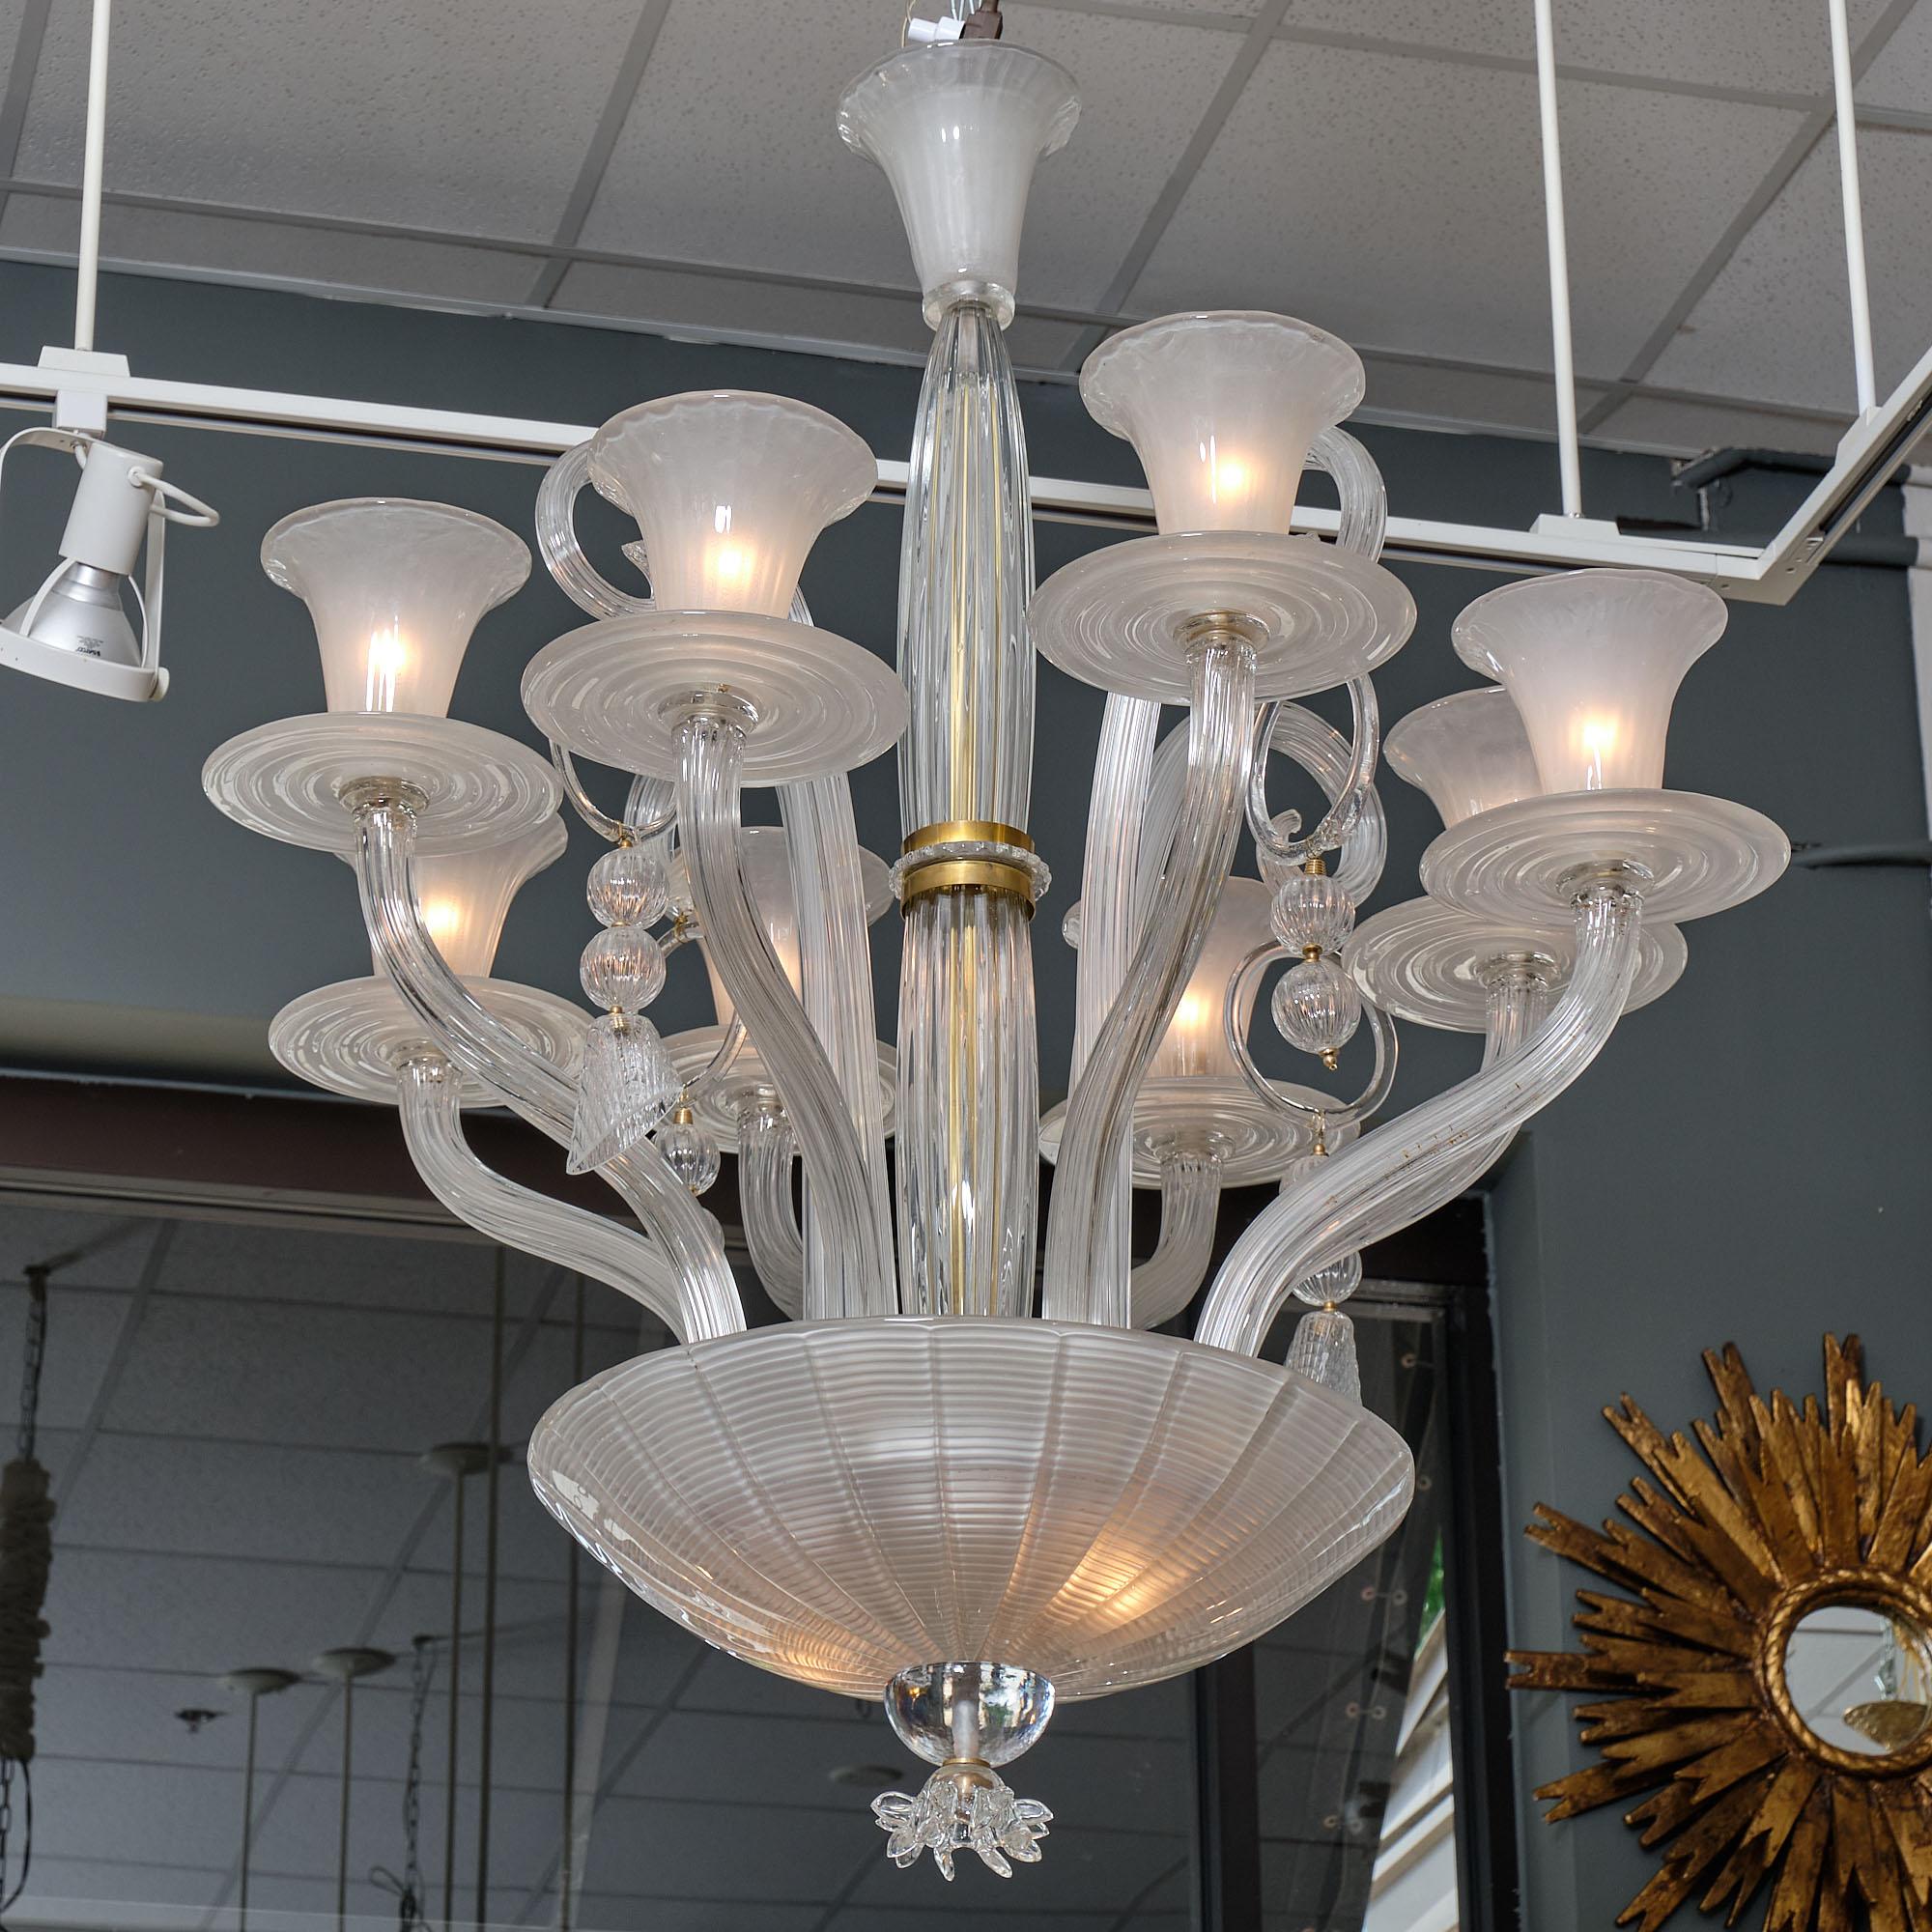 Italian chandelier from the island of Murano. This exquisite chandelier has eight branches and four curled up stems with ridged glass components hanging off of each stem. Brass details can be found in the middle section of the chandelier. This piece